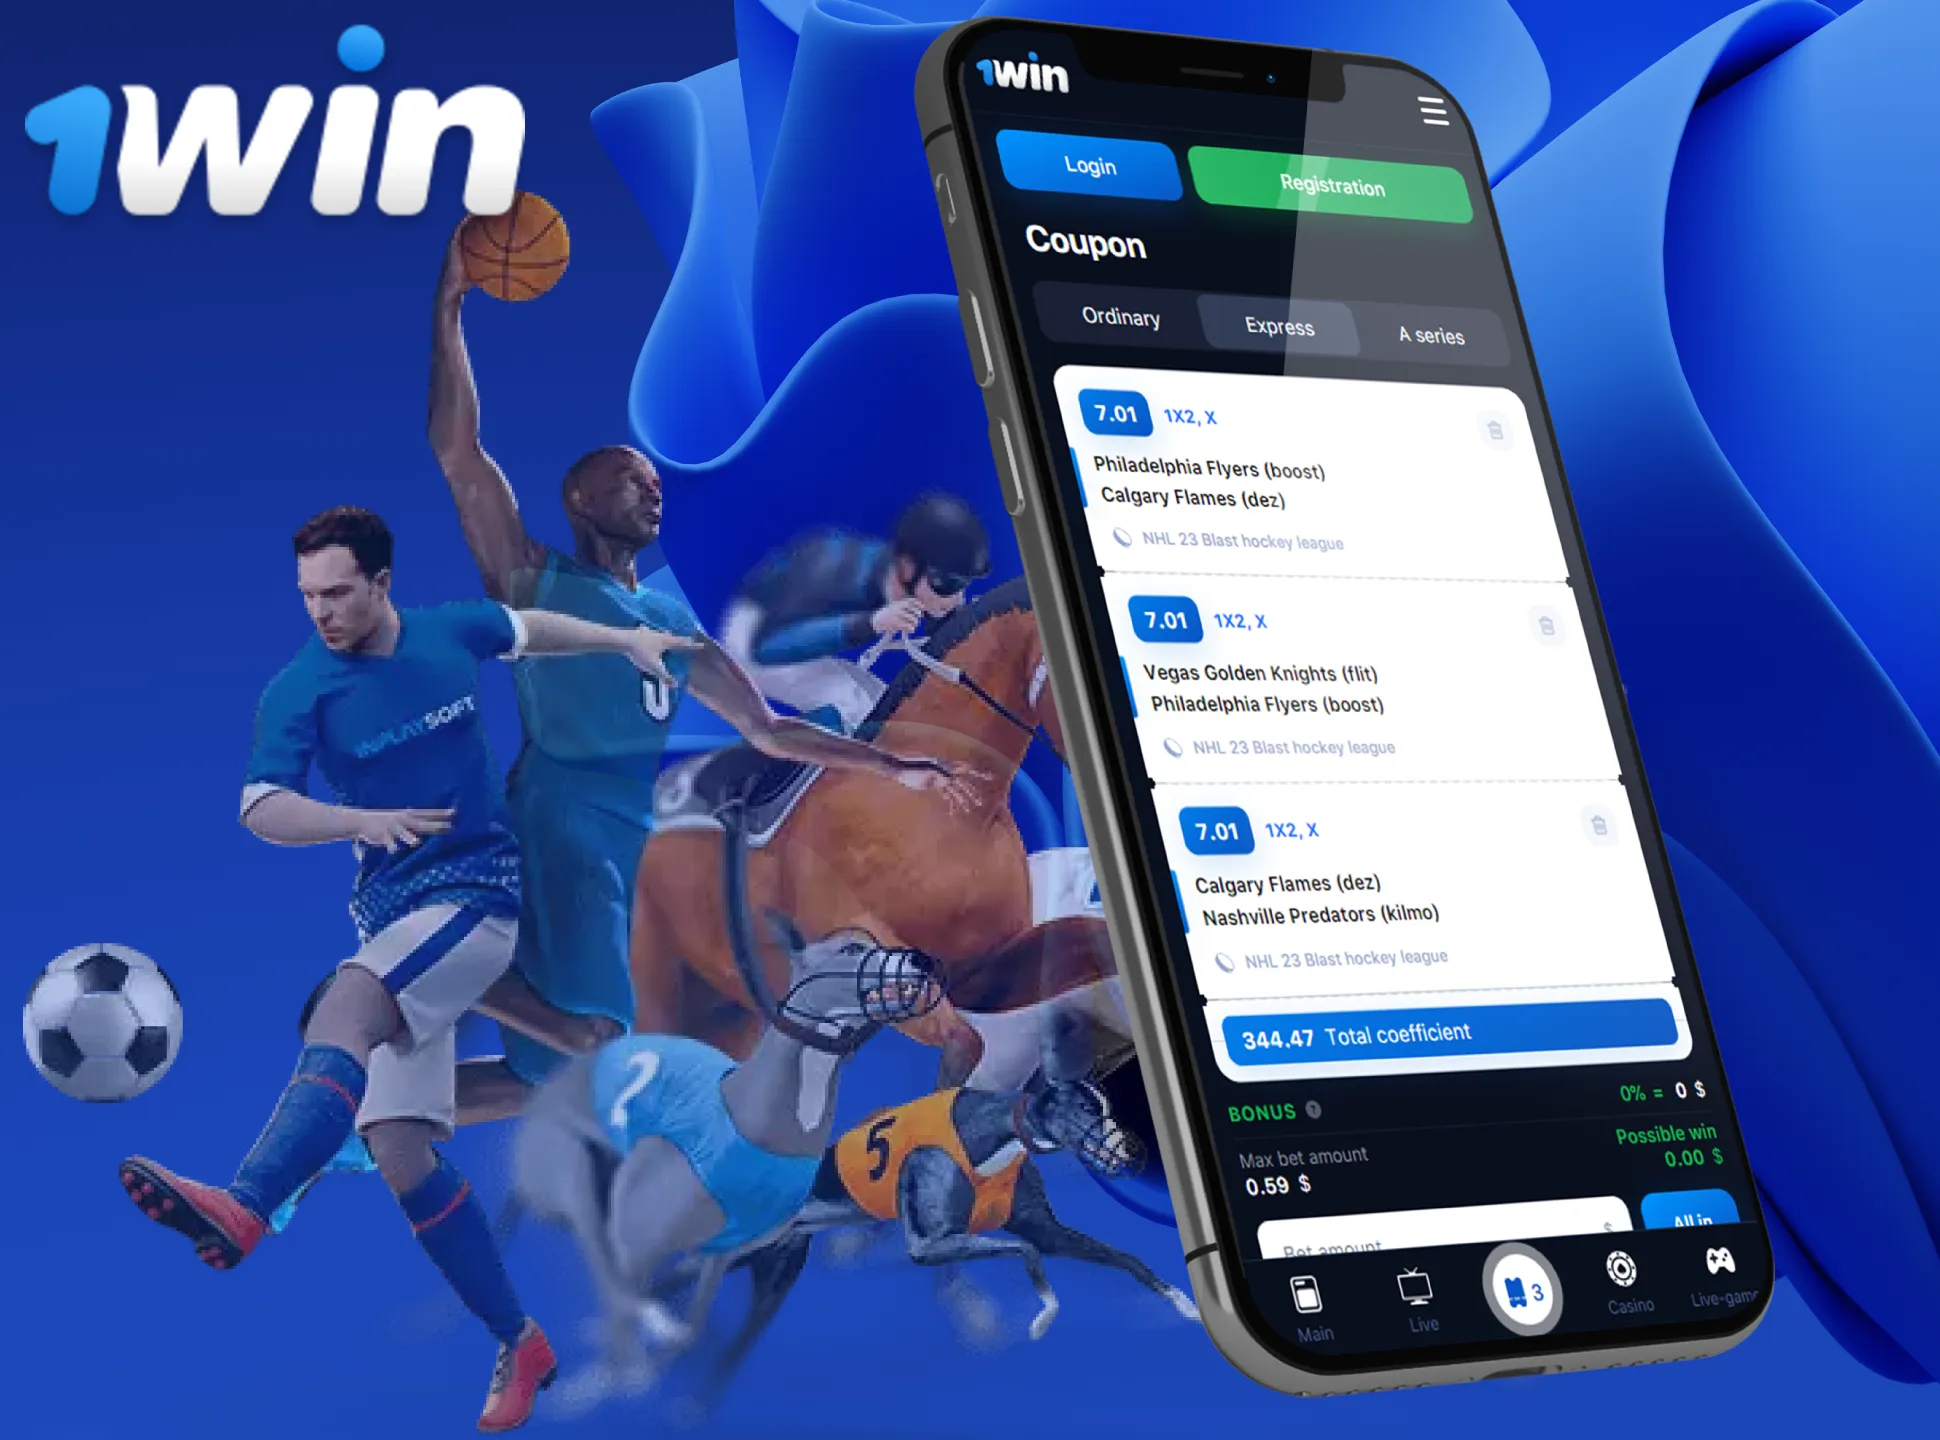 You can place single, combo and other bets on the 1win app.